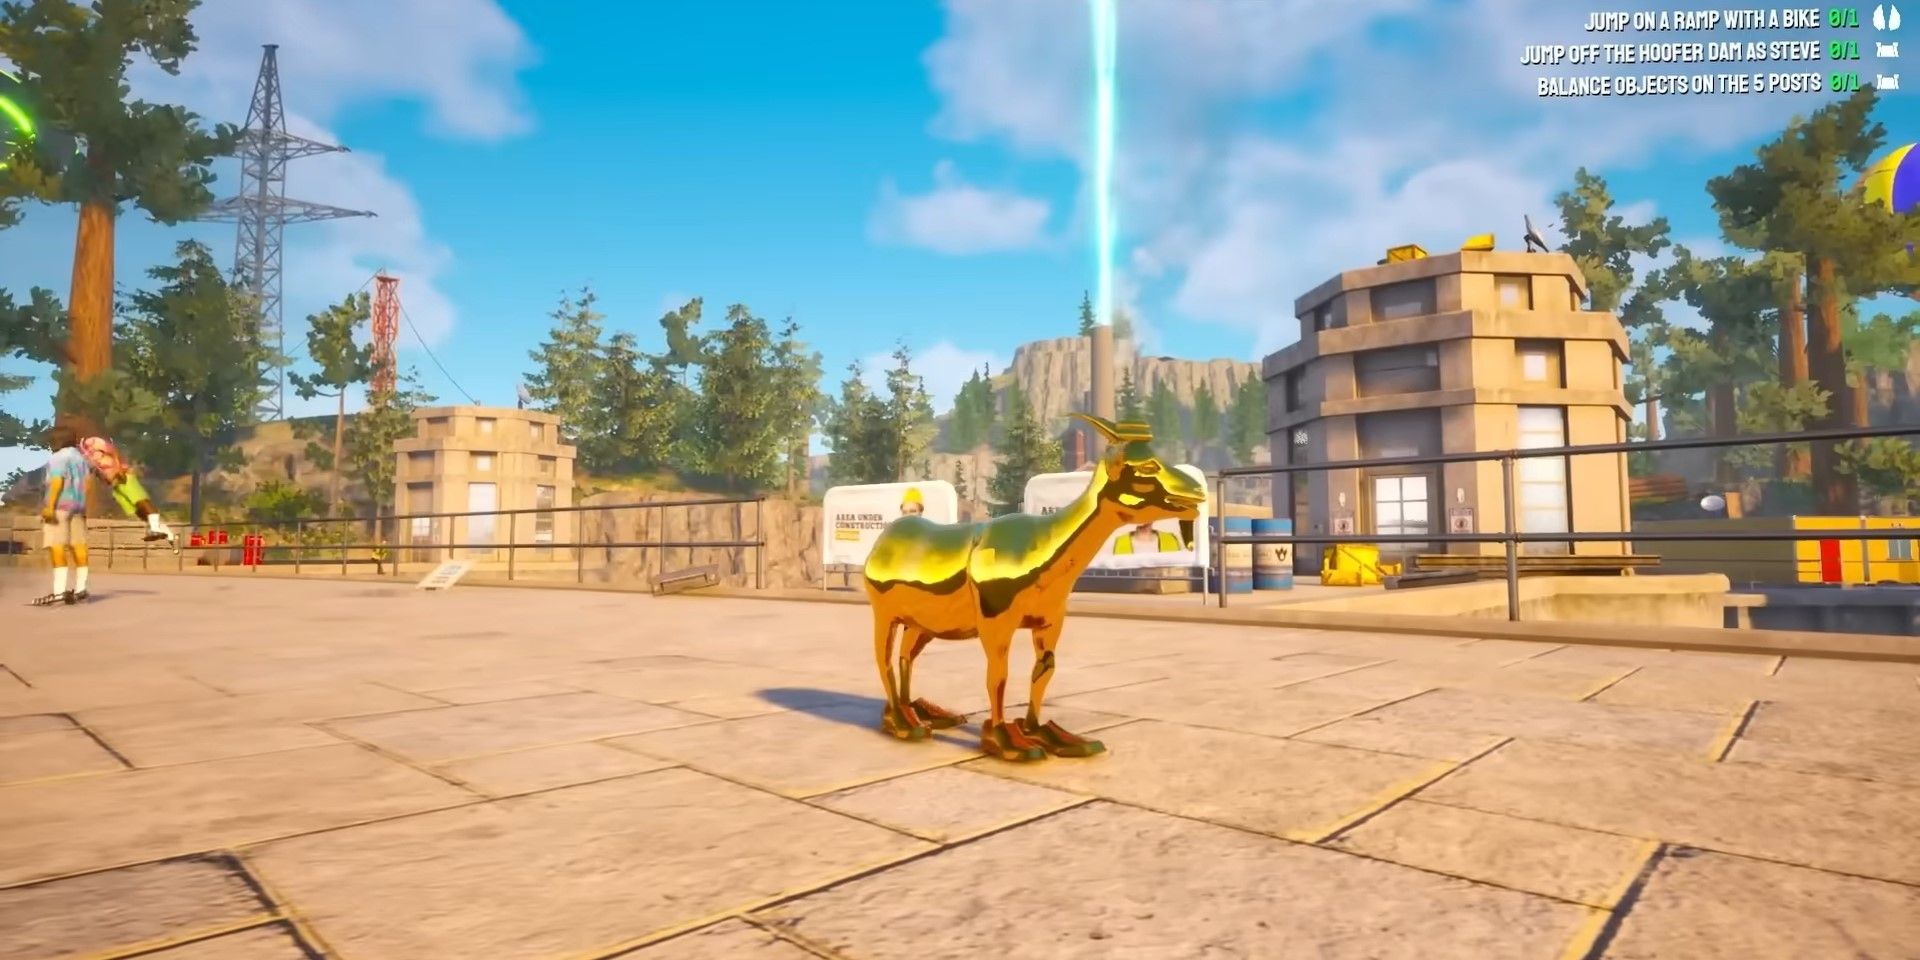 An all golden Goat roaming the streets of San Angora in Goat Simulator 3.